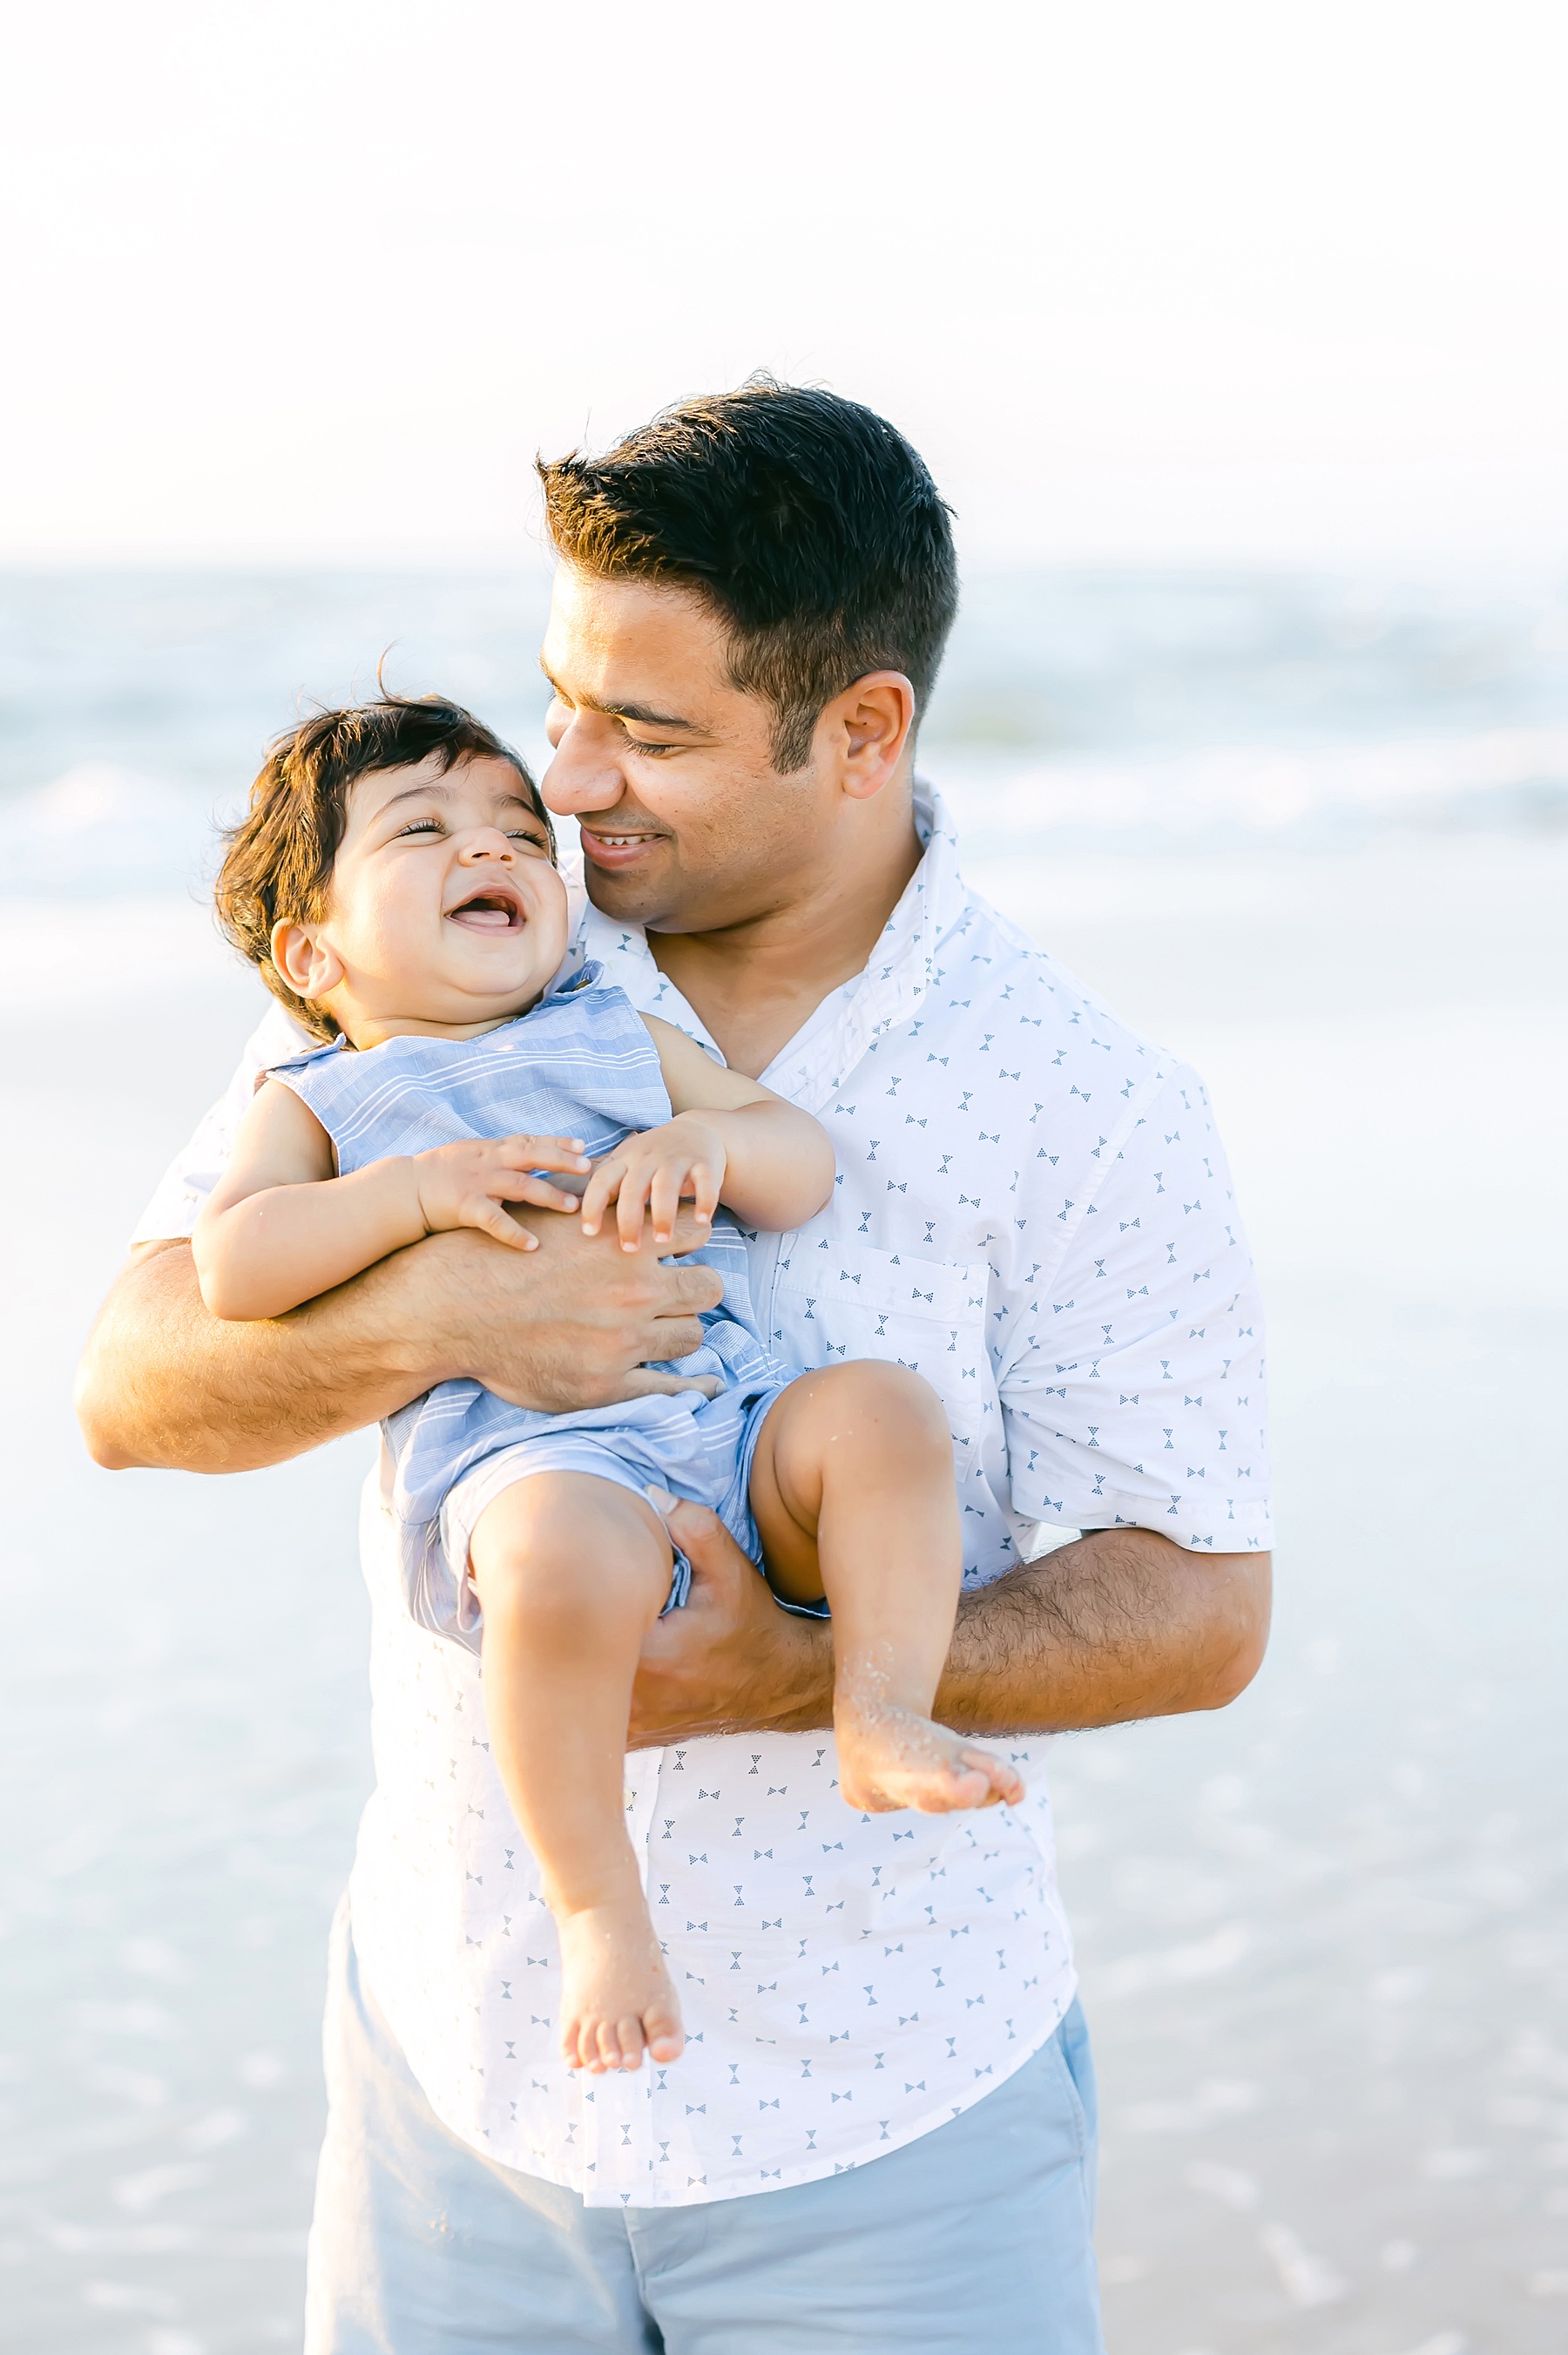 Dad holding baby laughing on the beach wearing blue and white